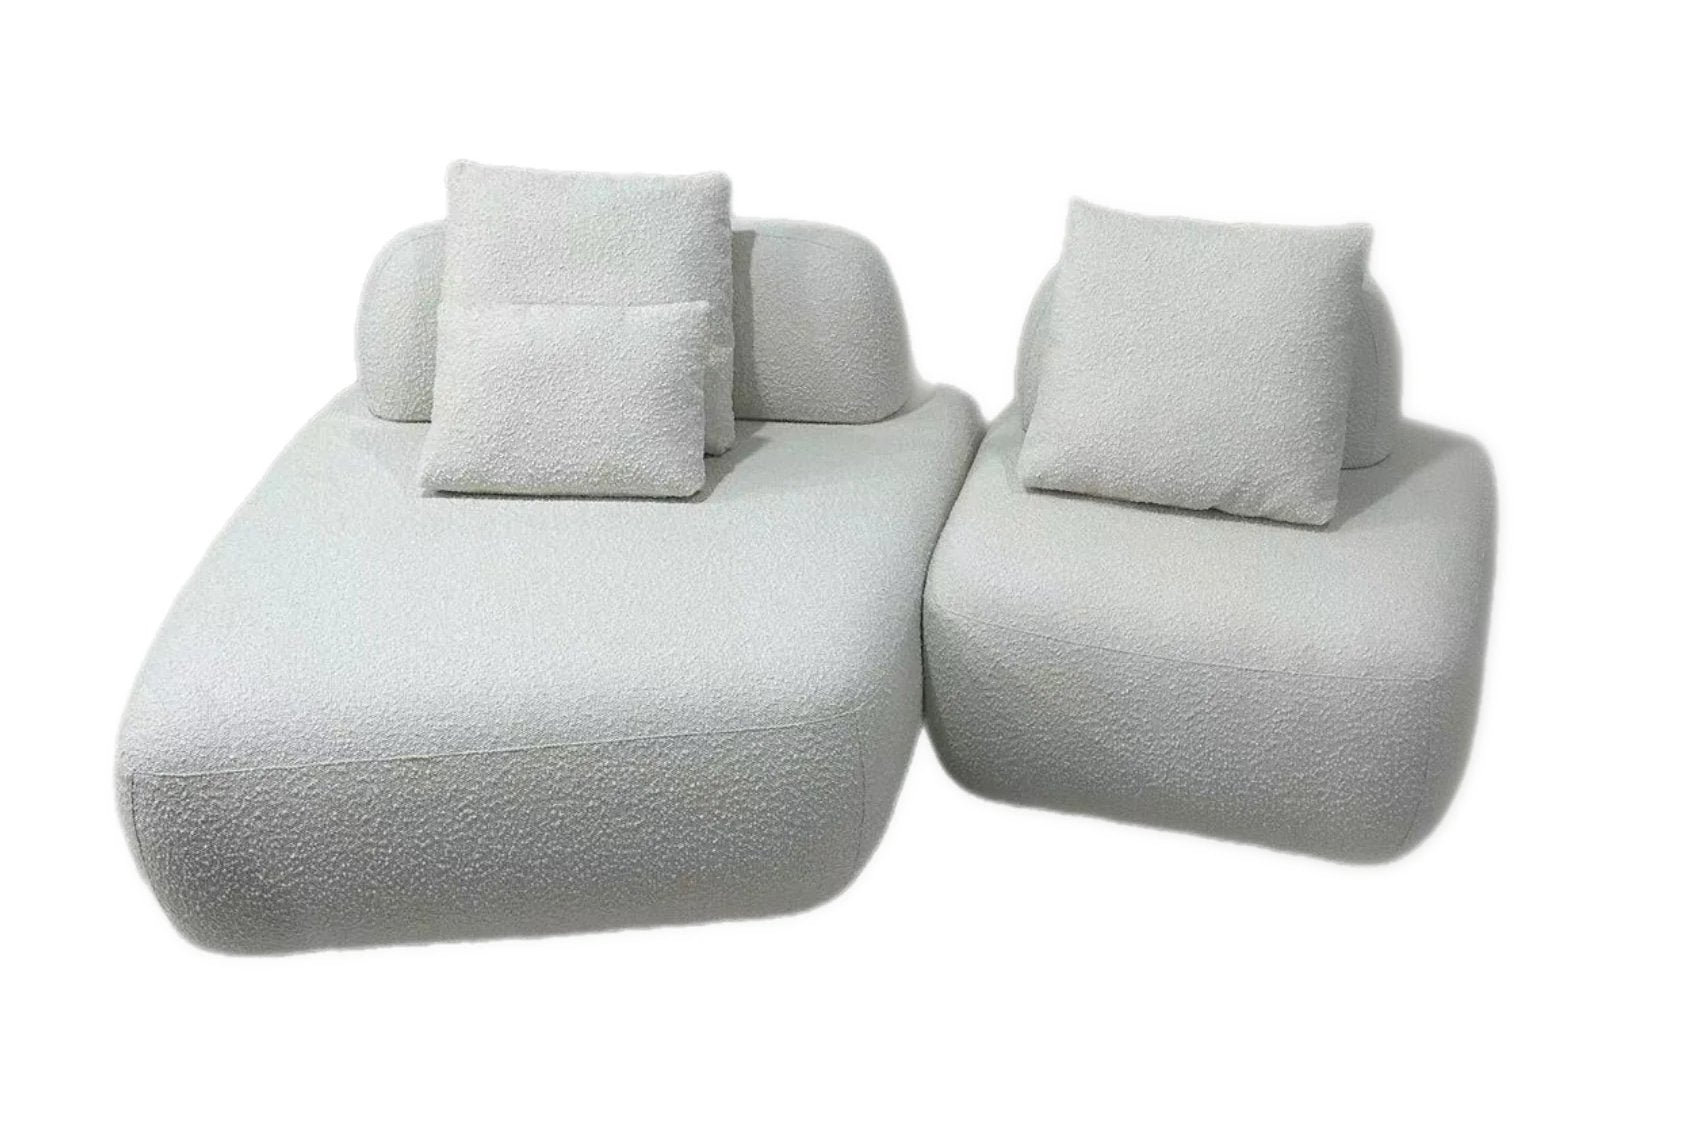 Modular Sofa Chaise Lounge +1 Seater White Boucle in stock